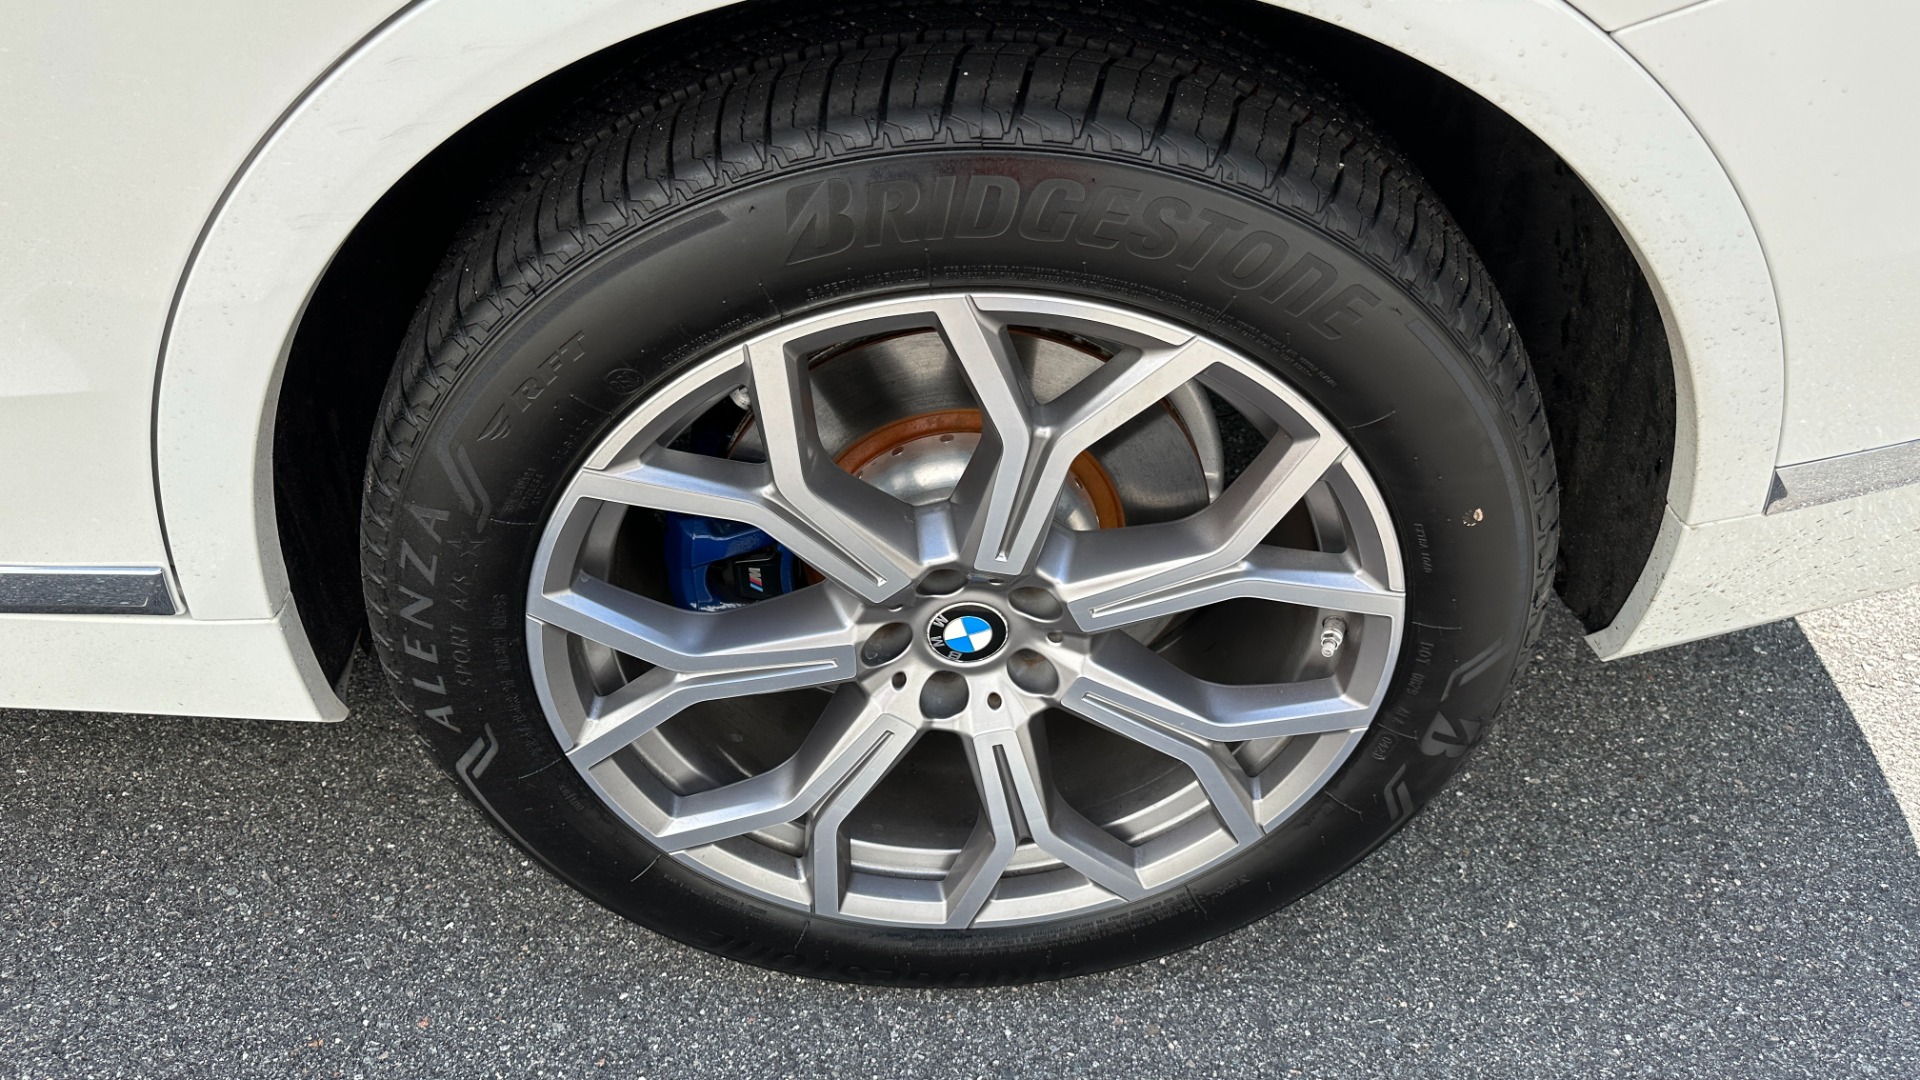 Used 2020 BMW X7 xDrive40i / HK SOUND / COLD WEATHER / REMOTE START / M SPORT BRAKES for sale $55,995 at Formula Imports in Charlotte NC 28227 52